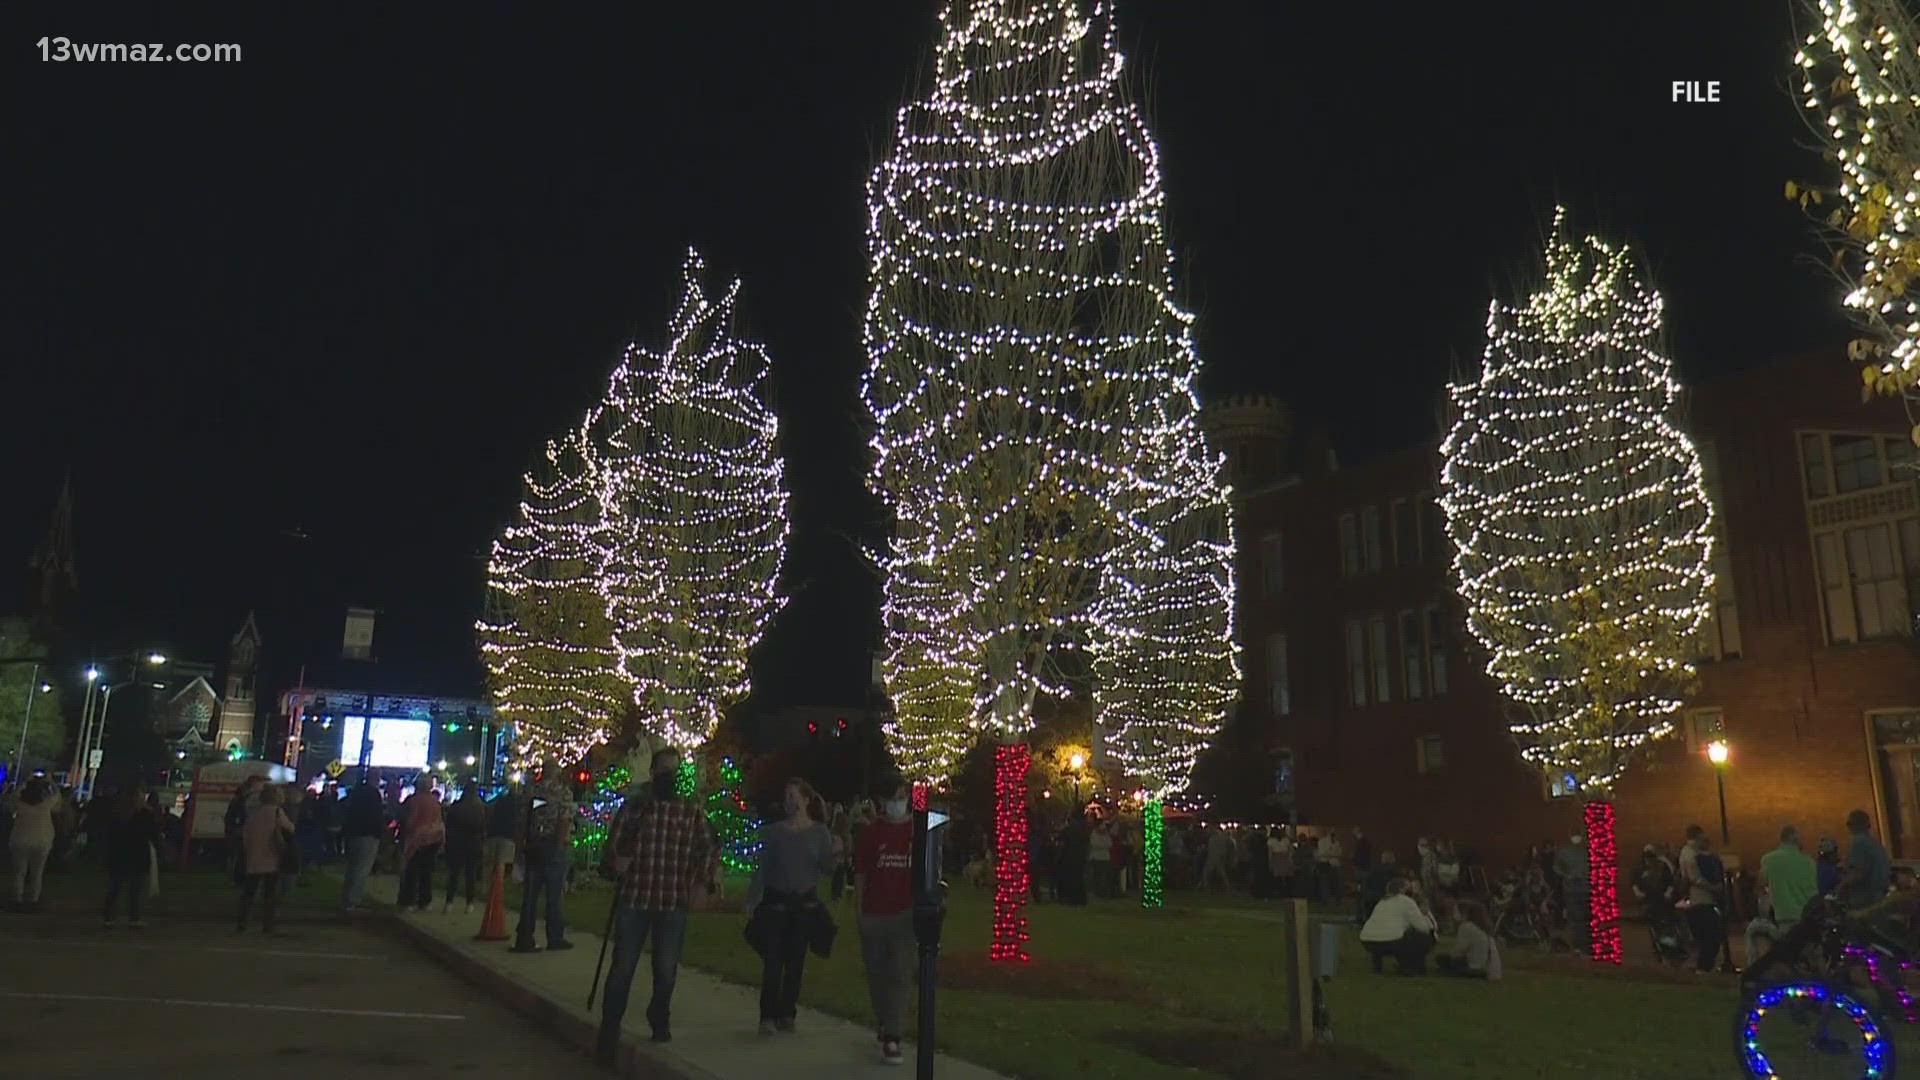 800,000 people came out to downtown Macon for the Christmas lights. Locals say it brings the community together.